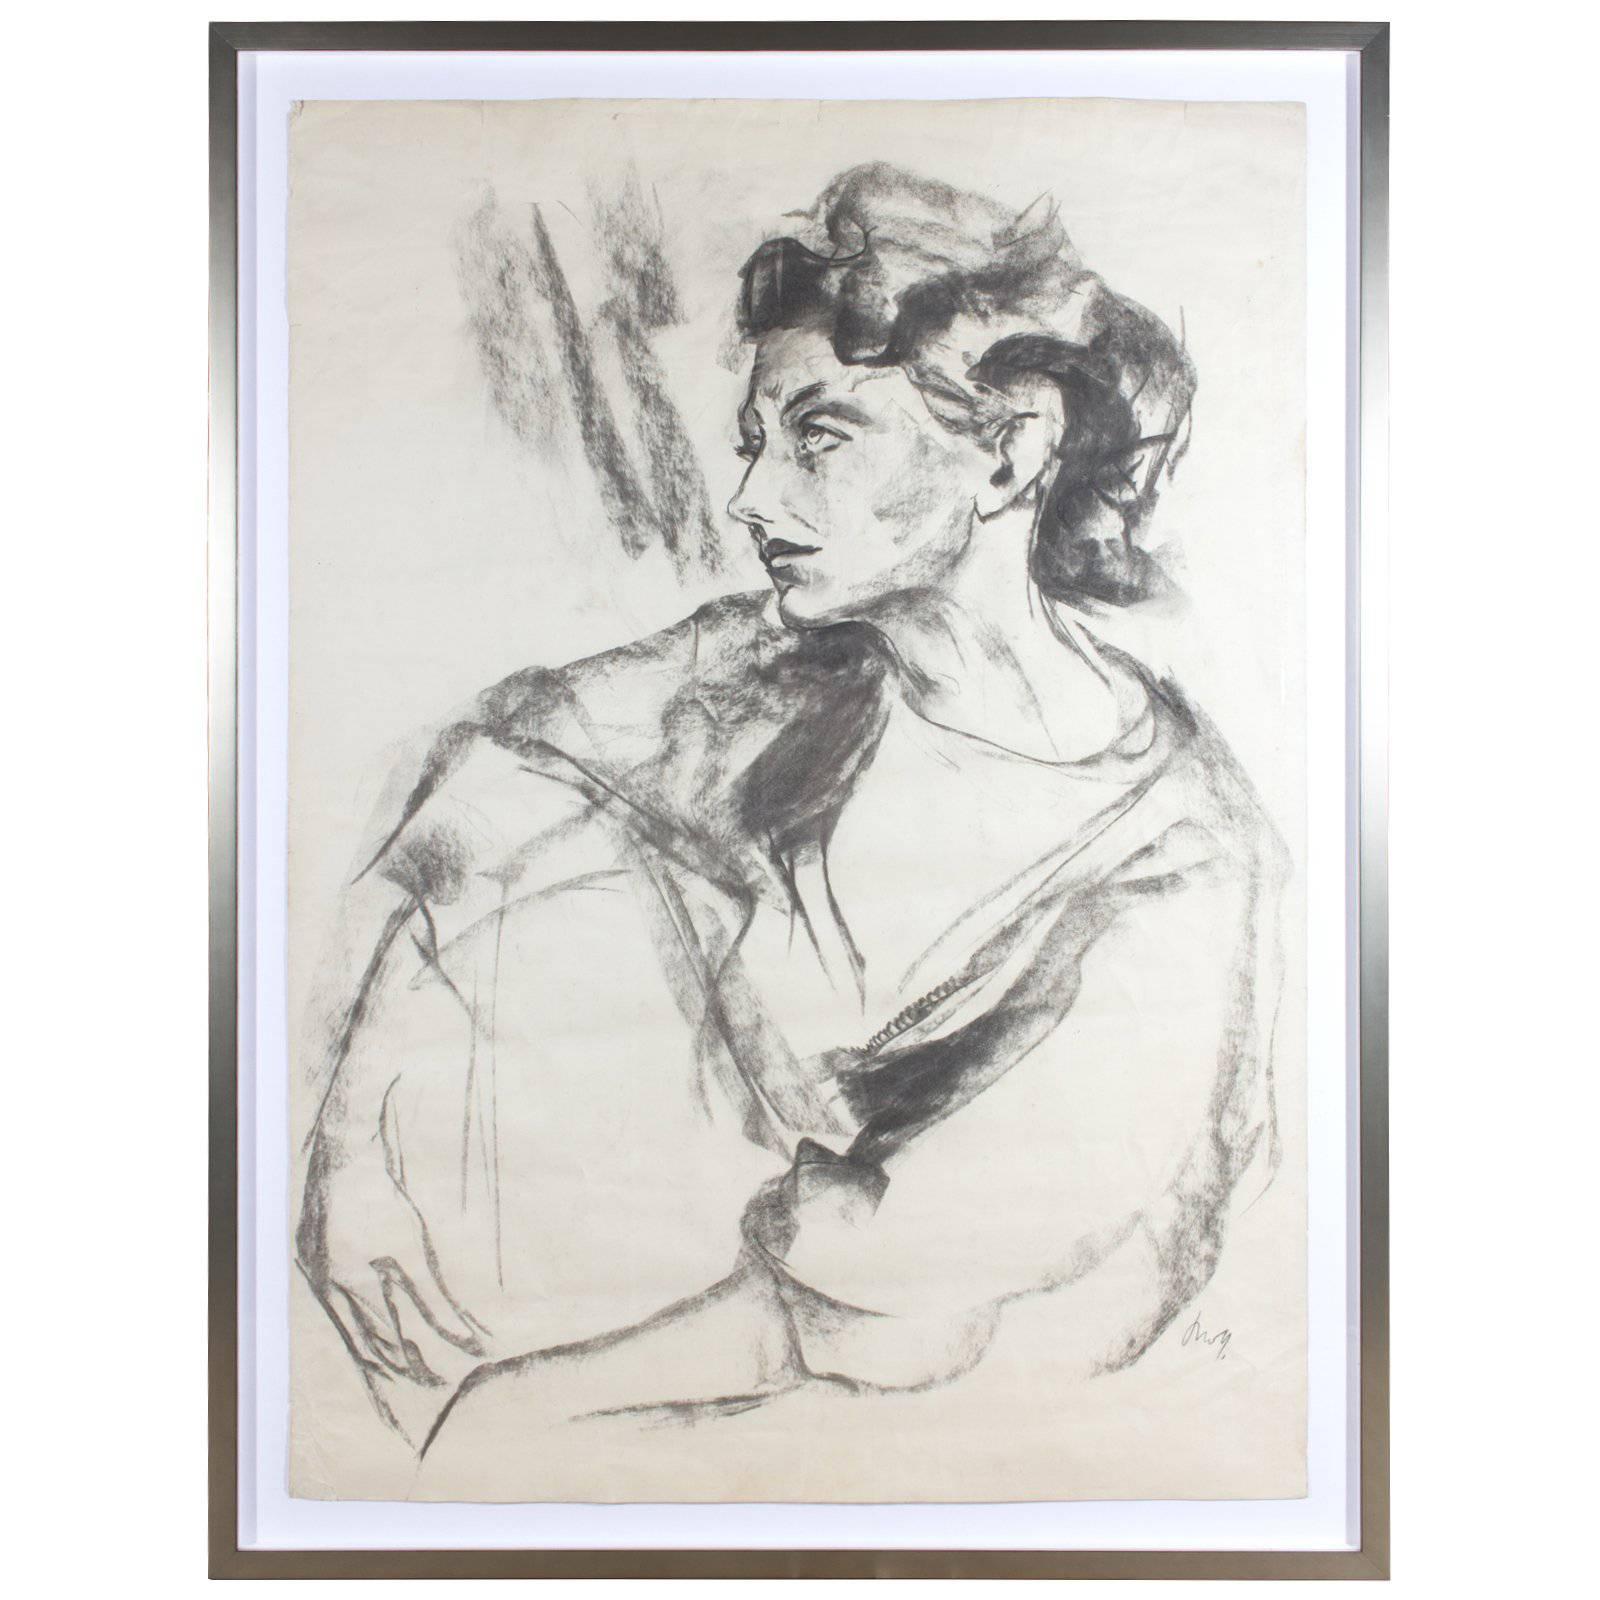 Framed Signed Midcentury Charcoal Sketch Found in Paris